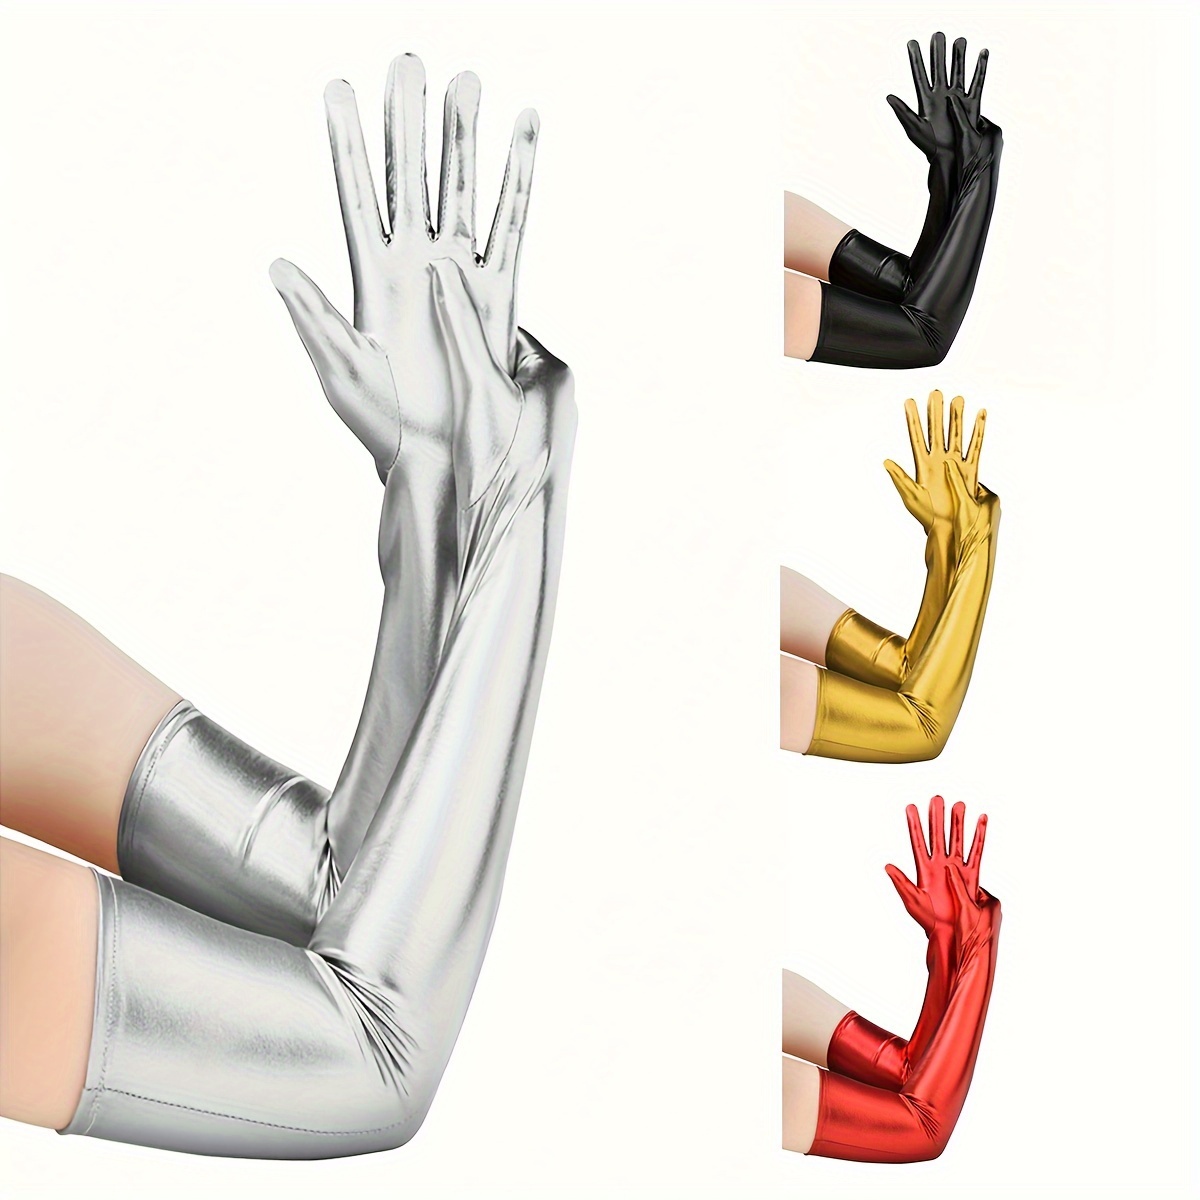 

Party Prom Gloves Elastic Glossy Gloves For Halloween Party Nightclub Cosplay Dress Up Accessories